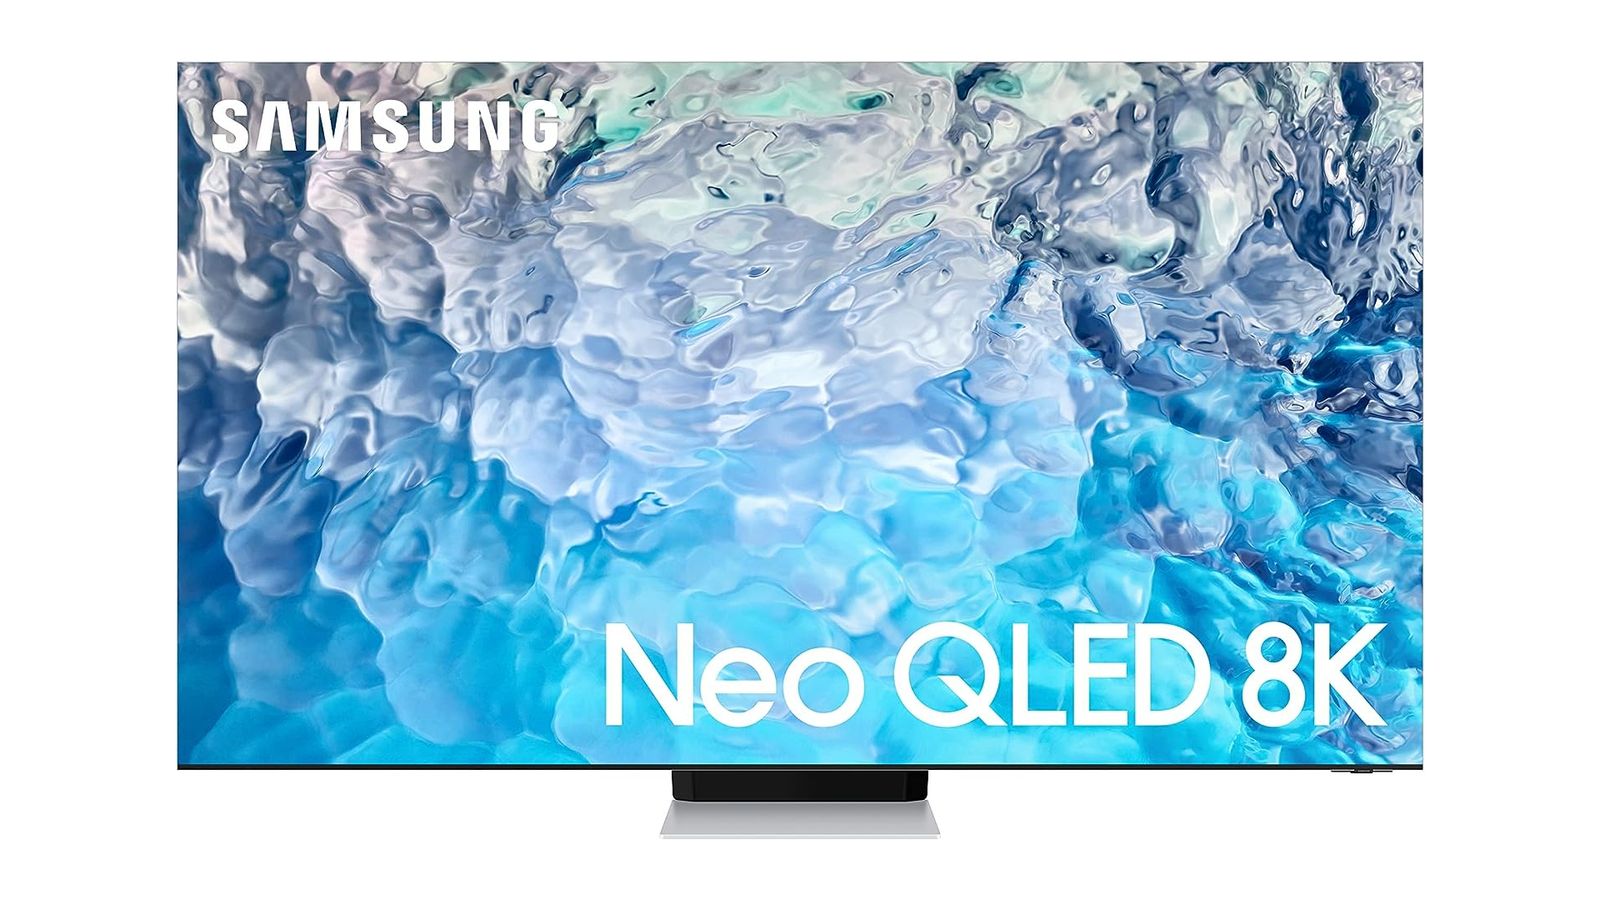 Samsung QN900B product image of a dark grey flatscreen TV with a light blue and white watery pattern on the display.